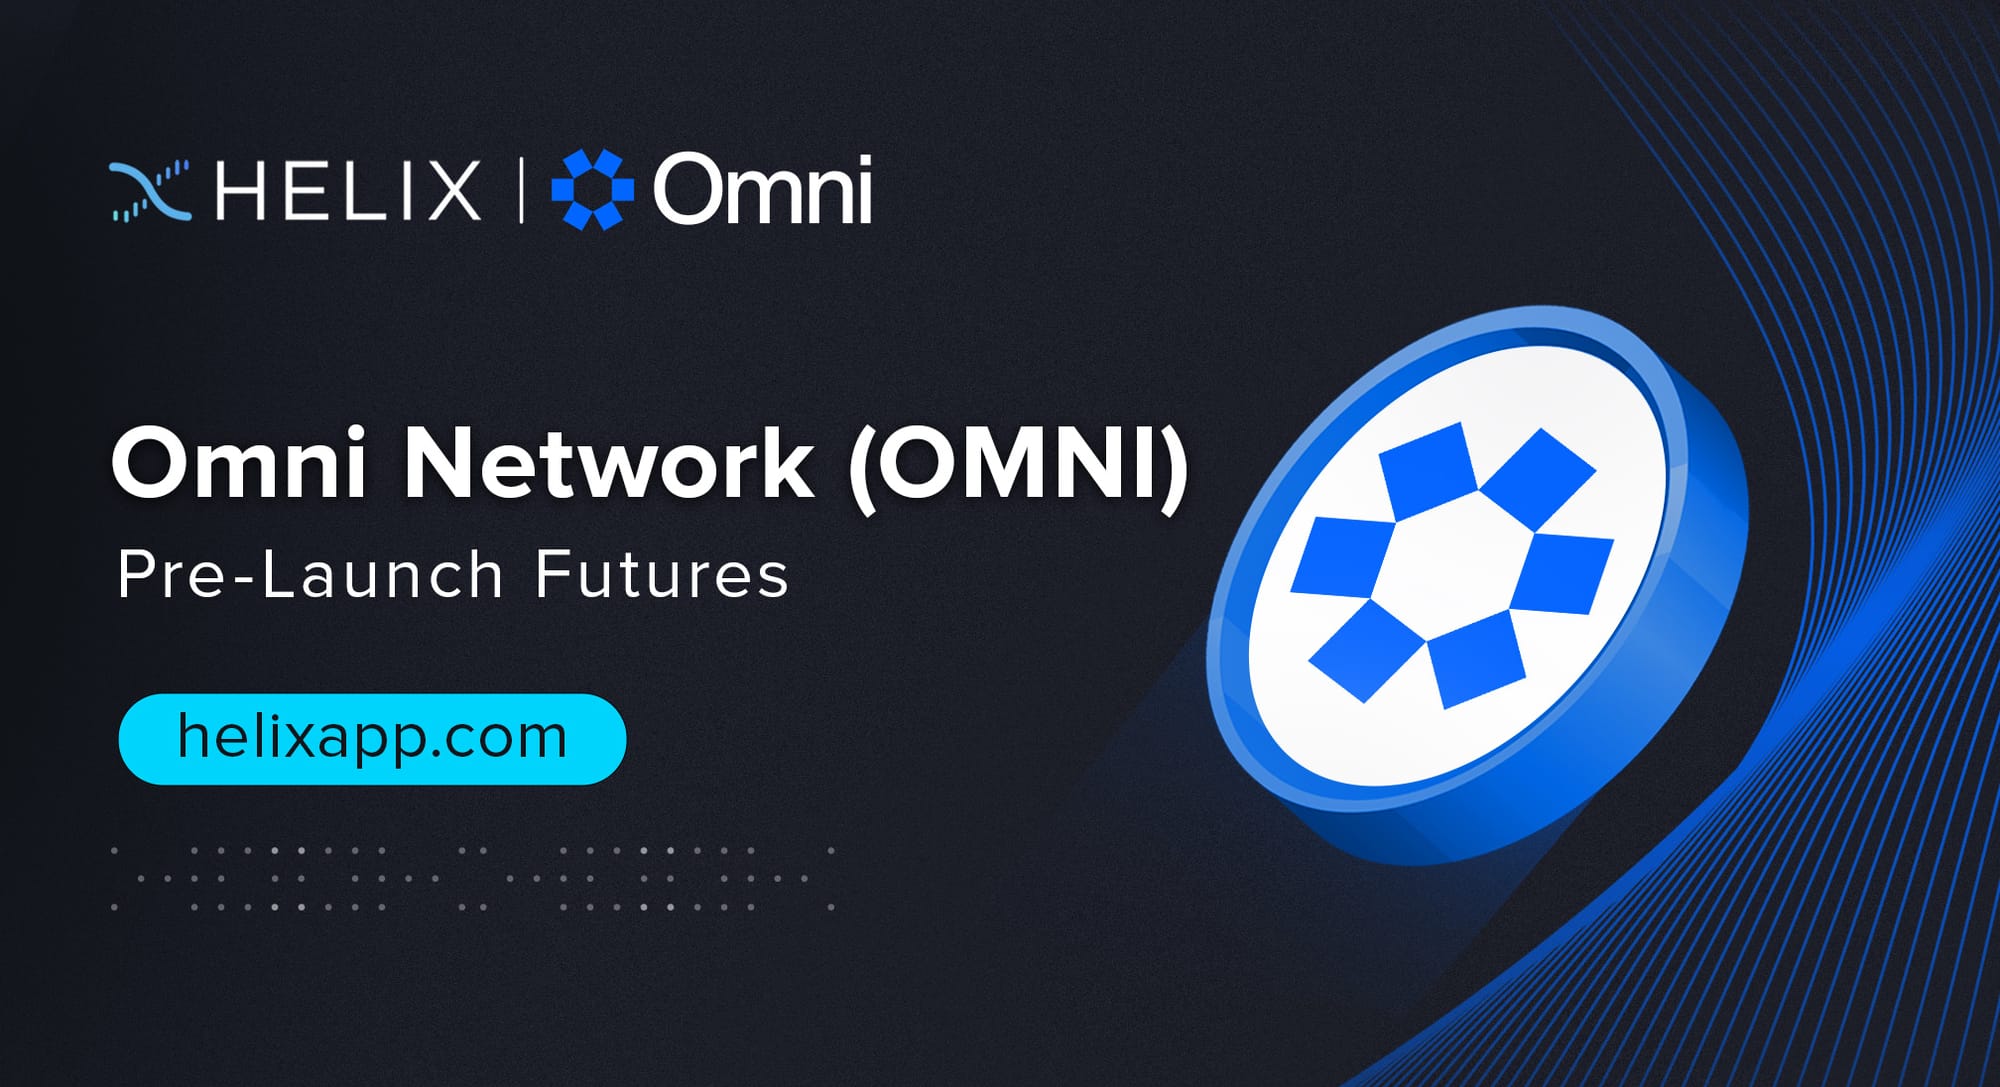 Decentralized Omni Network (OMNI) Pre-Launch Futures Listing on Helix